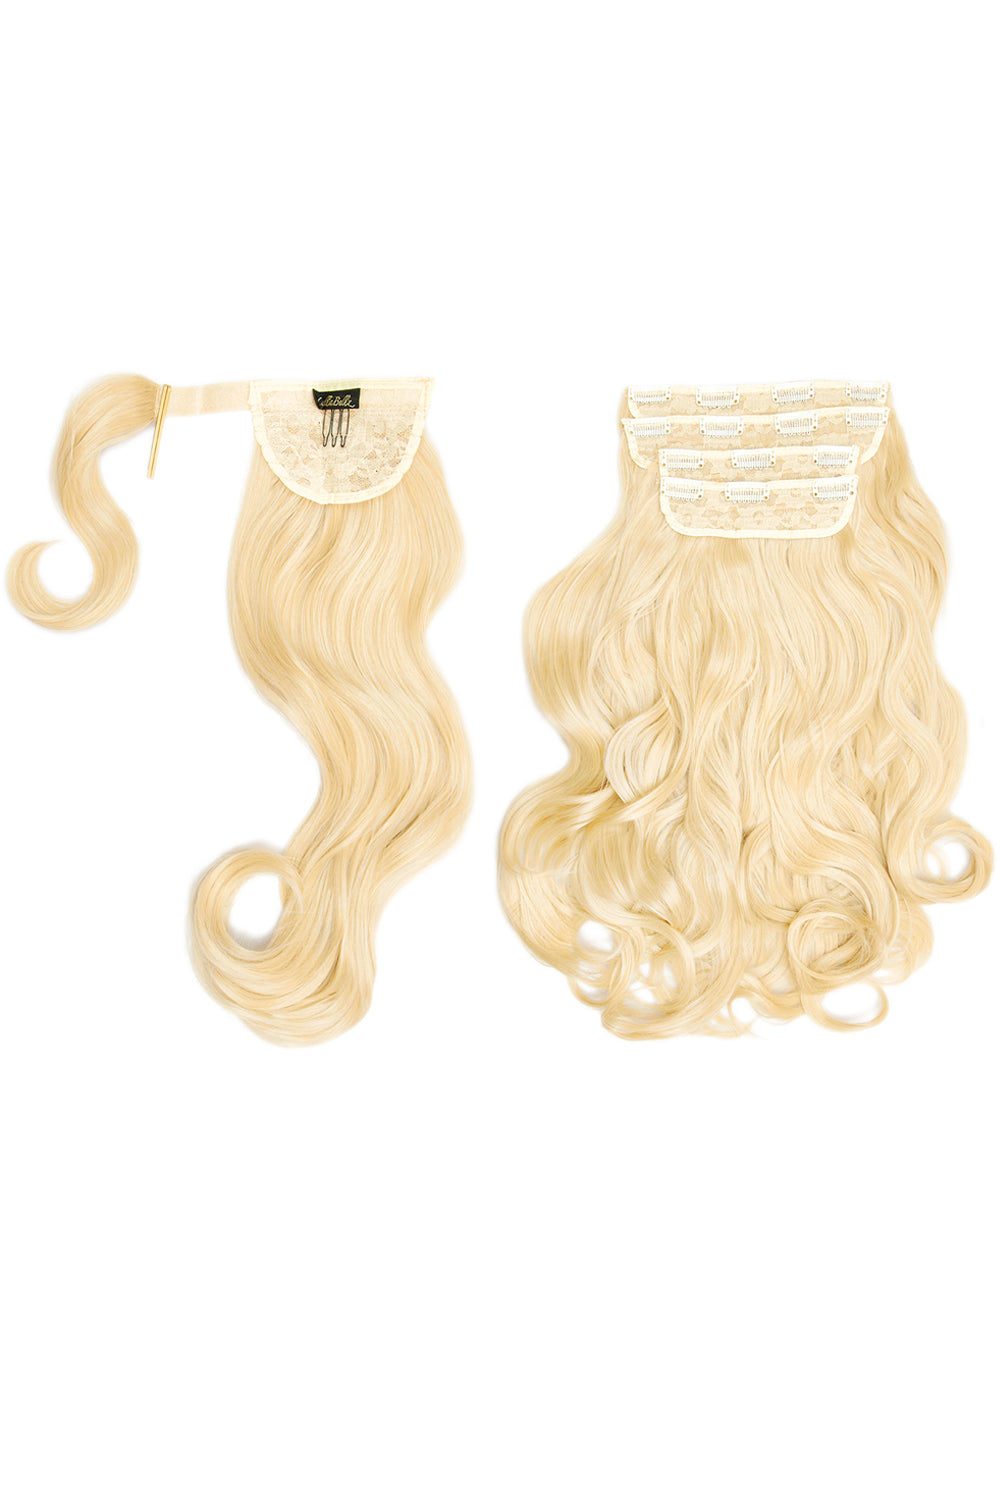 Ultimate Half Up Half Down 22’’ Curly Extension and Pony Set - Pure Blonde